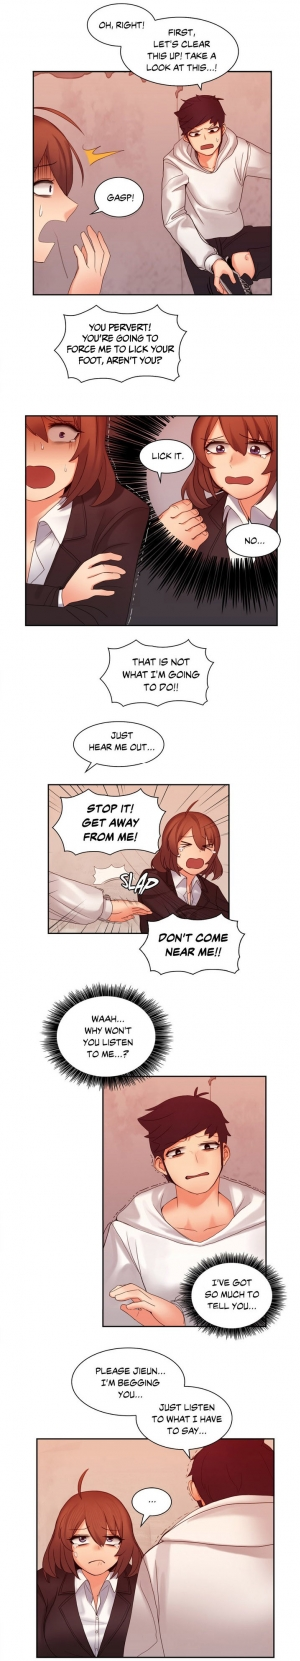 [Gaehoju, Gunnermul] The Girl That Got Stuck in the Wall Ch.11/11 [COMPLETED] [English] [Hentai Universe] - Page 108